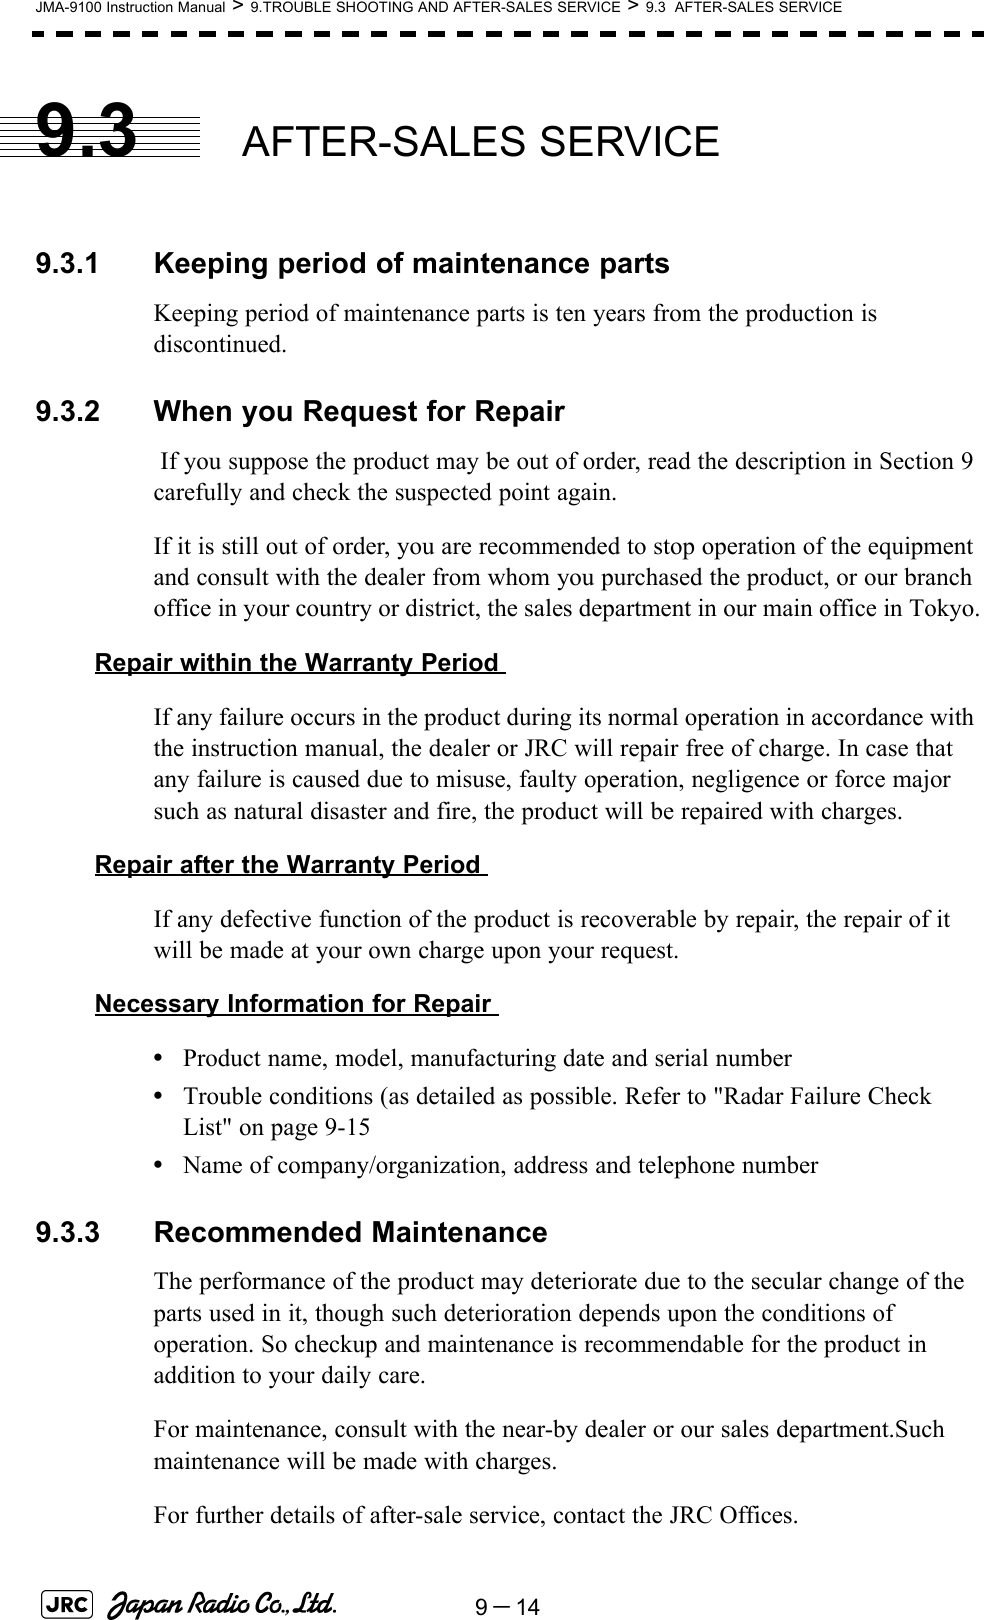 9－14JMA-9100 Instruction Manual &gt; 9.TROUBLE SHOOTING AND AFTER-SALES SERVICE &gt; 9.3  AFTER-SALES SERVICE9.3 AFTER-SALES SERVICE9.3.1 Keeping period of maintenance partsKeeping period of maintenance parts is ten years from the production is discontinued.9.3.2 When you Request for Repair If you suppose the product may be out of order, read the description in Section 9 carefully and check the suspected point again.If it is still out of order, you are recommended to stop operation of the equipment and consult with the dealer from whom you purchased the product, or our branch office in your country or district, the sales department in our main office in Tokyo.Repair within the Warranty Period If any failure occurs in the product during its normal operation in accordance with the instruction manual, the dealer or JRC will repair free of charge. In case that any failure is caused due to misuse, faulty operation, negligence or force major such as natural disaster and fire, the product will be repaired with charges.Repair after the Warranty Period If any defective function of the product is recoverable by repair, the repair of it will be made at your own charge upon your request.Necessary Information for Repair •Product name, model, manufacturing date and serial number•Trouble conditions (as detailed as possible. Refer to &quot;Radar Failure Check List&quot; on page 9-15•Name of company/organization, address and telephone number9.3.3 Recommended MaintenanceThe performance of the product may deteriorate due to the secular change of the parts used in it, though such deterioration depends upon the conditions of operation. So checkup and maintenance is recommendable for the product in addition to your daily care.For maintenance, consult with the near-by dealer or our sales department.Such maintenance will be made with charges.For further details of after-sale service, contact the JRC Offices.